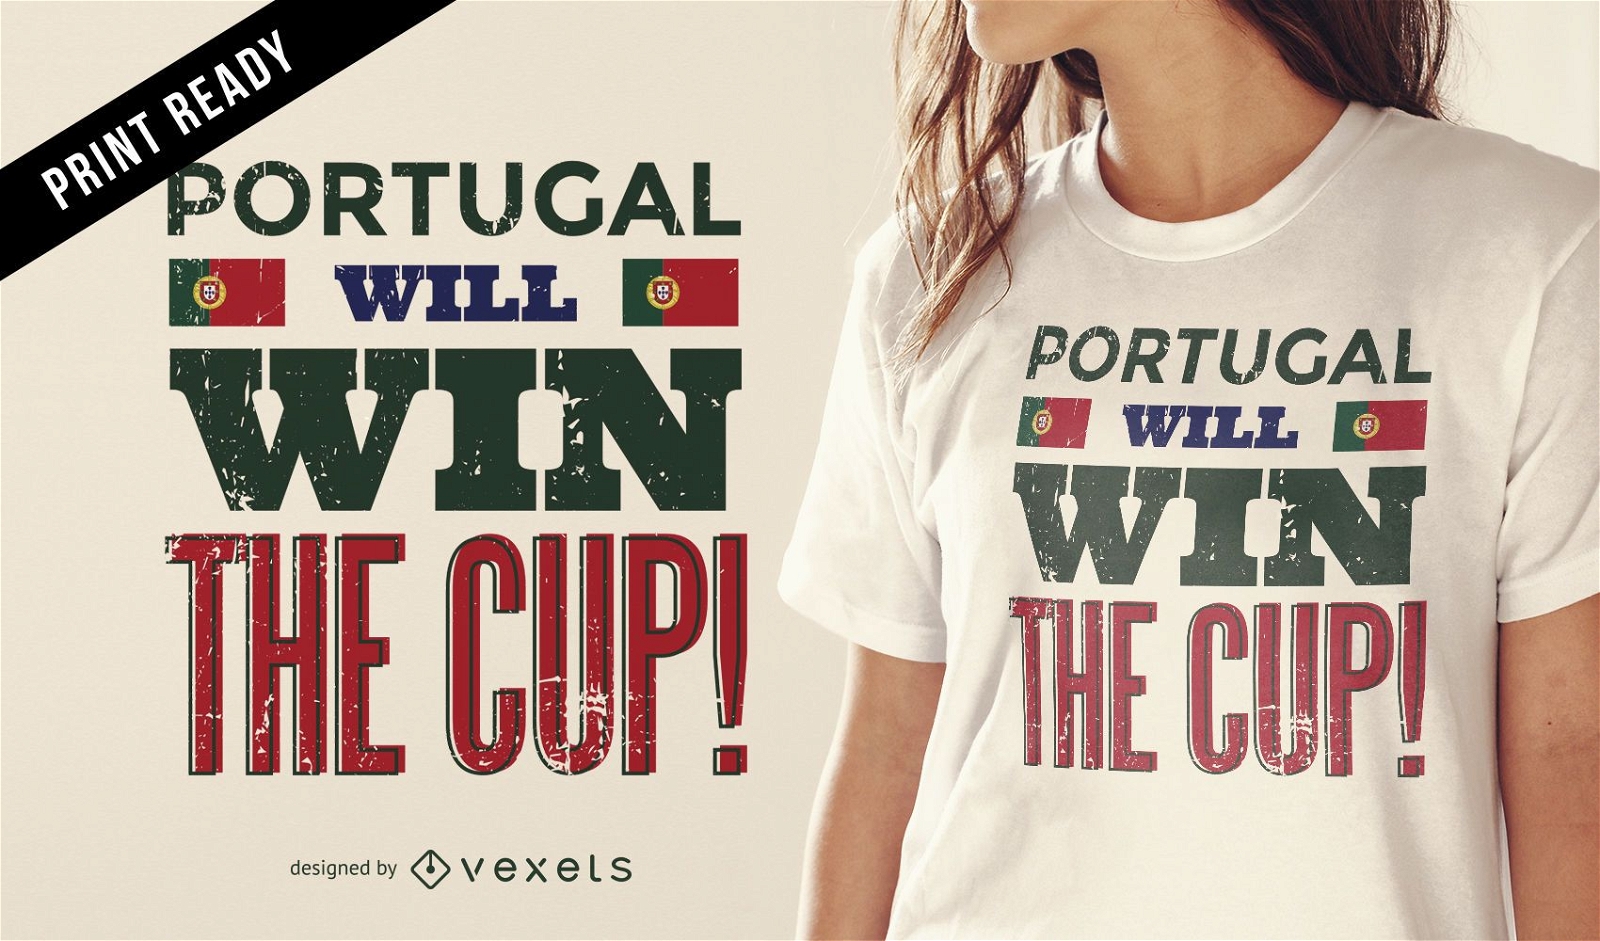 Portugal world cup t-shirt design